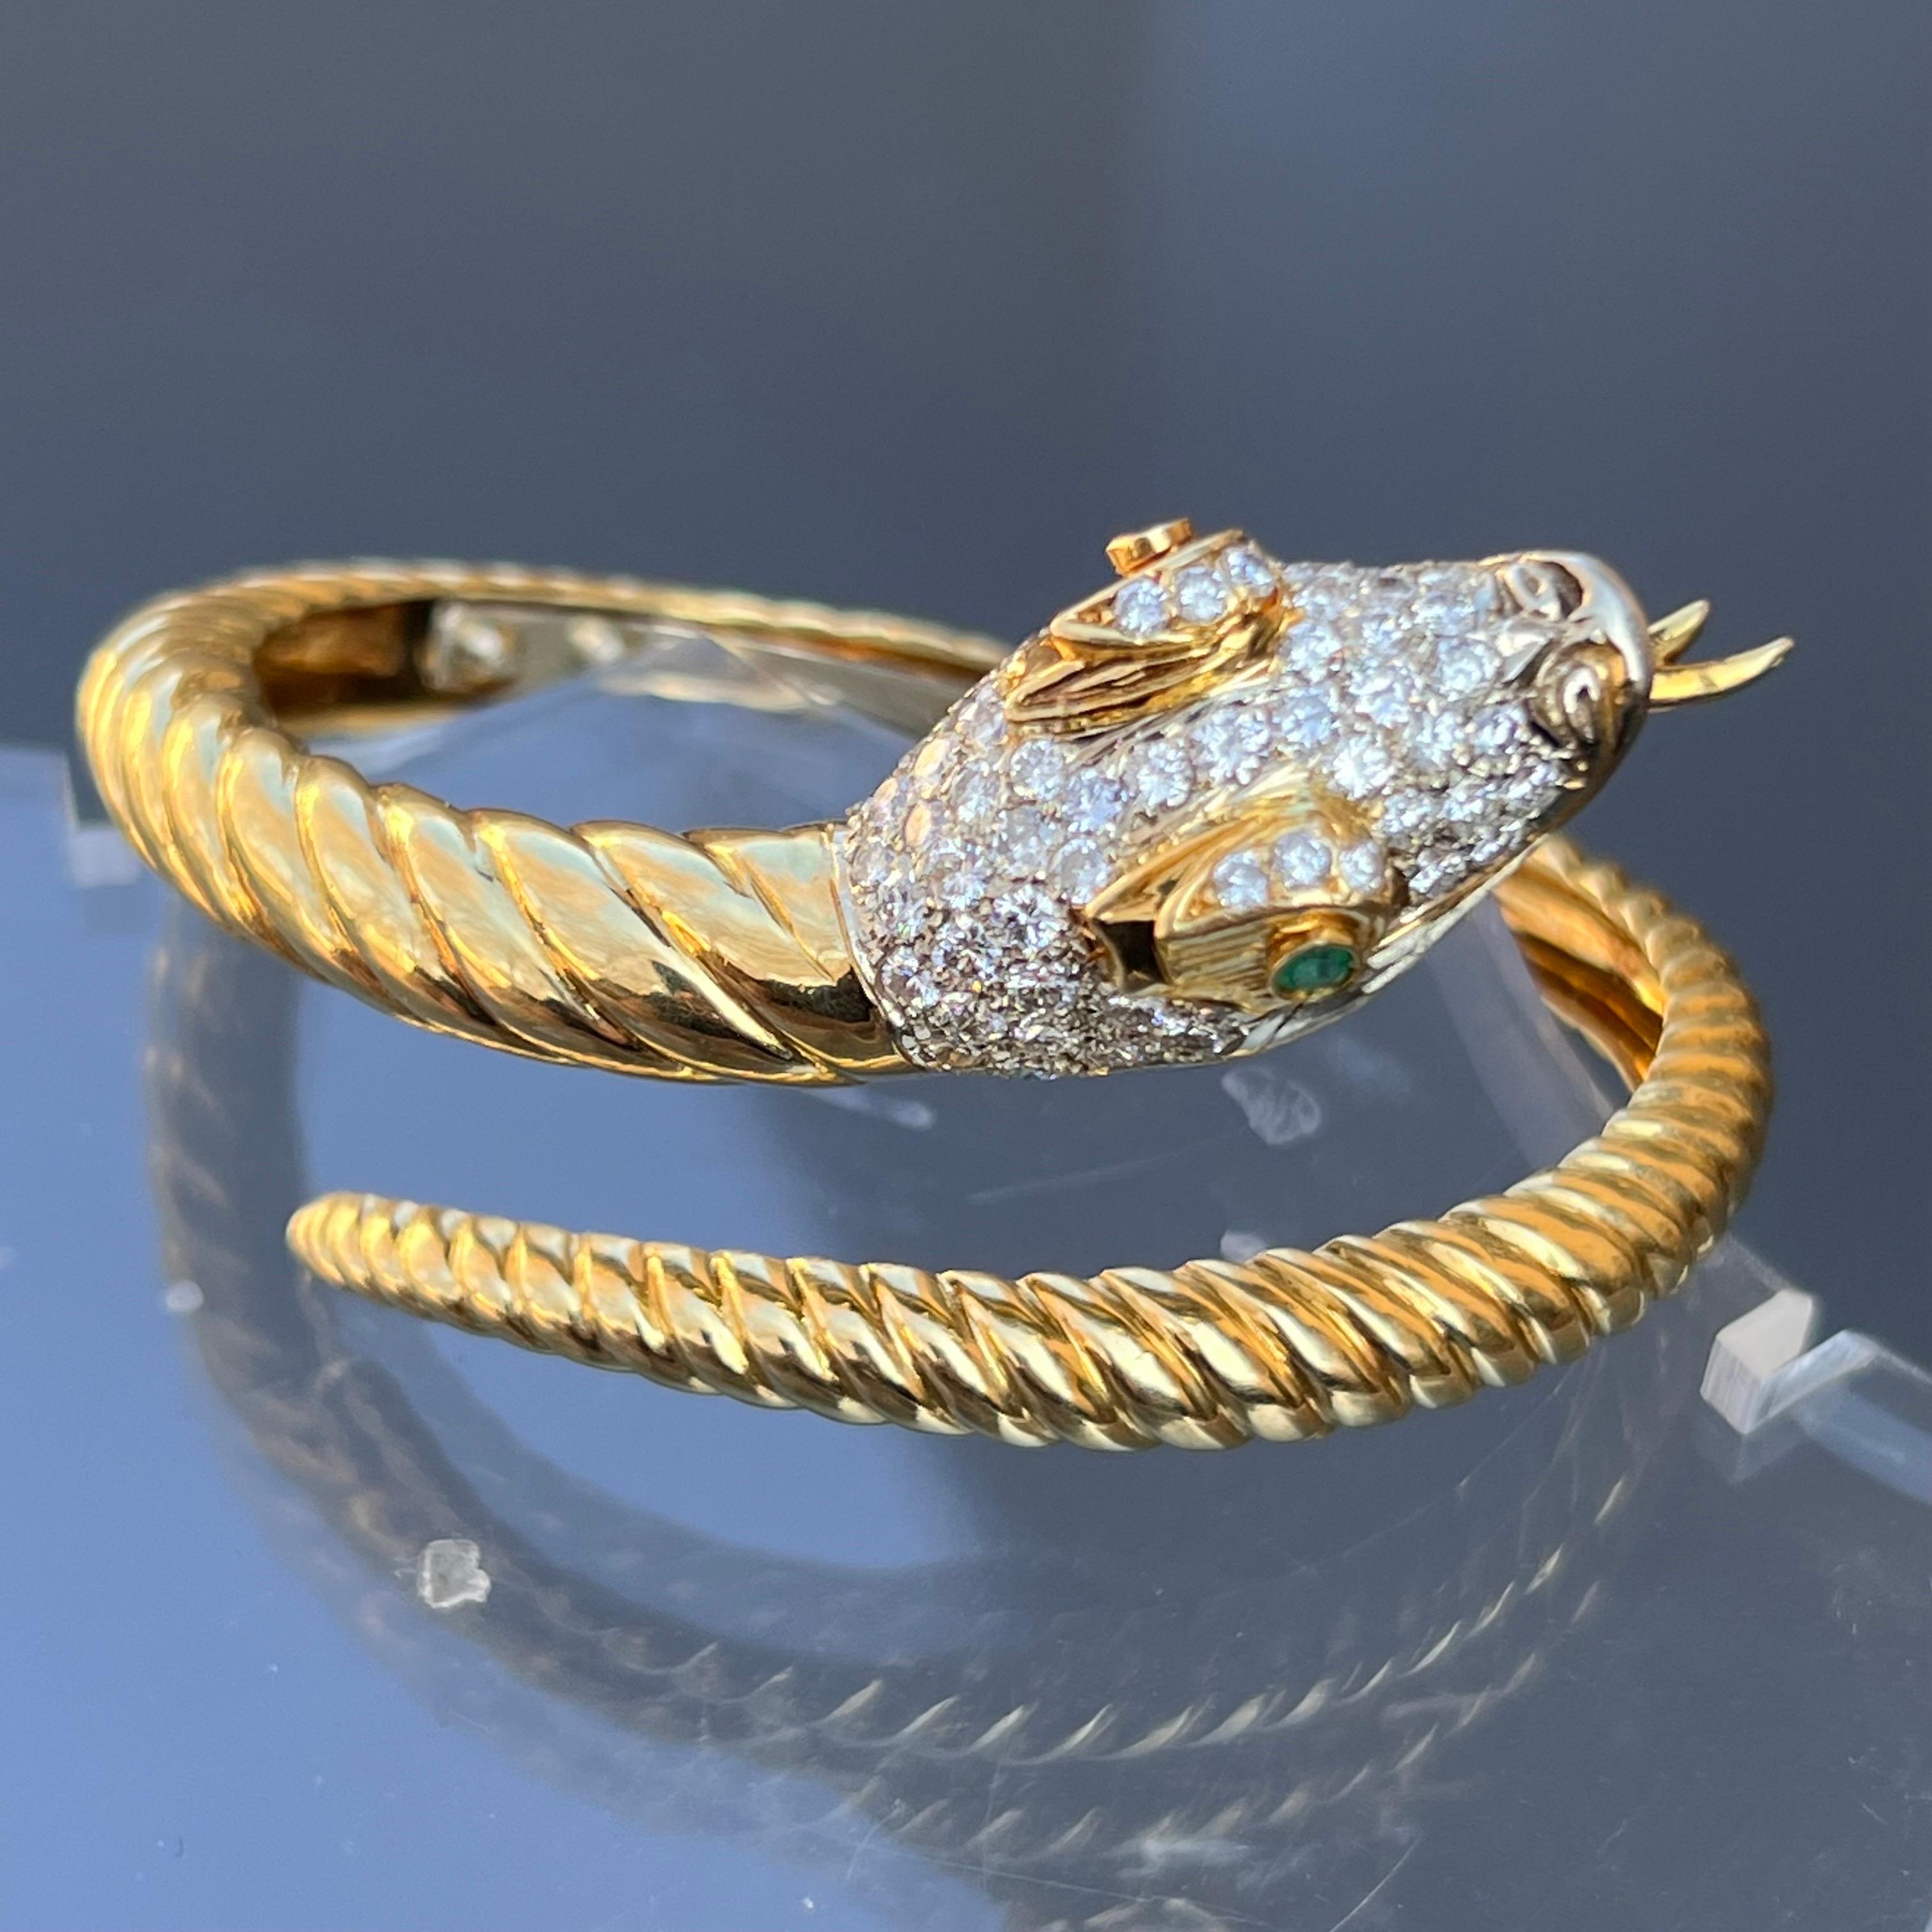 OUTSTANDING heavy vintage  solid 18kt gold snake hinged bangle/bracelet  with head covered with fifty six prong set, round cut diamonds and 2 bezel emerald eyes . Snake body is ribbed with tongue sticking out .
marked 18kt Italy
Dates :